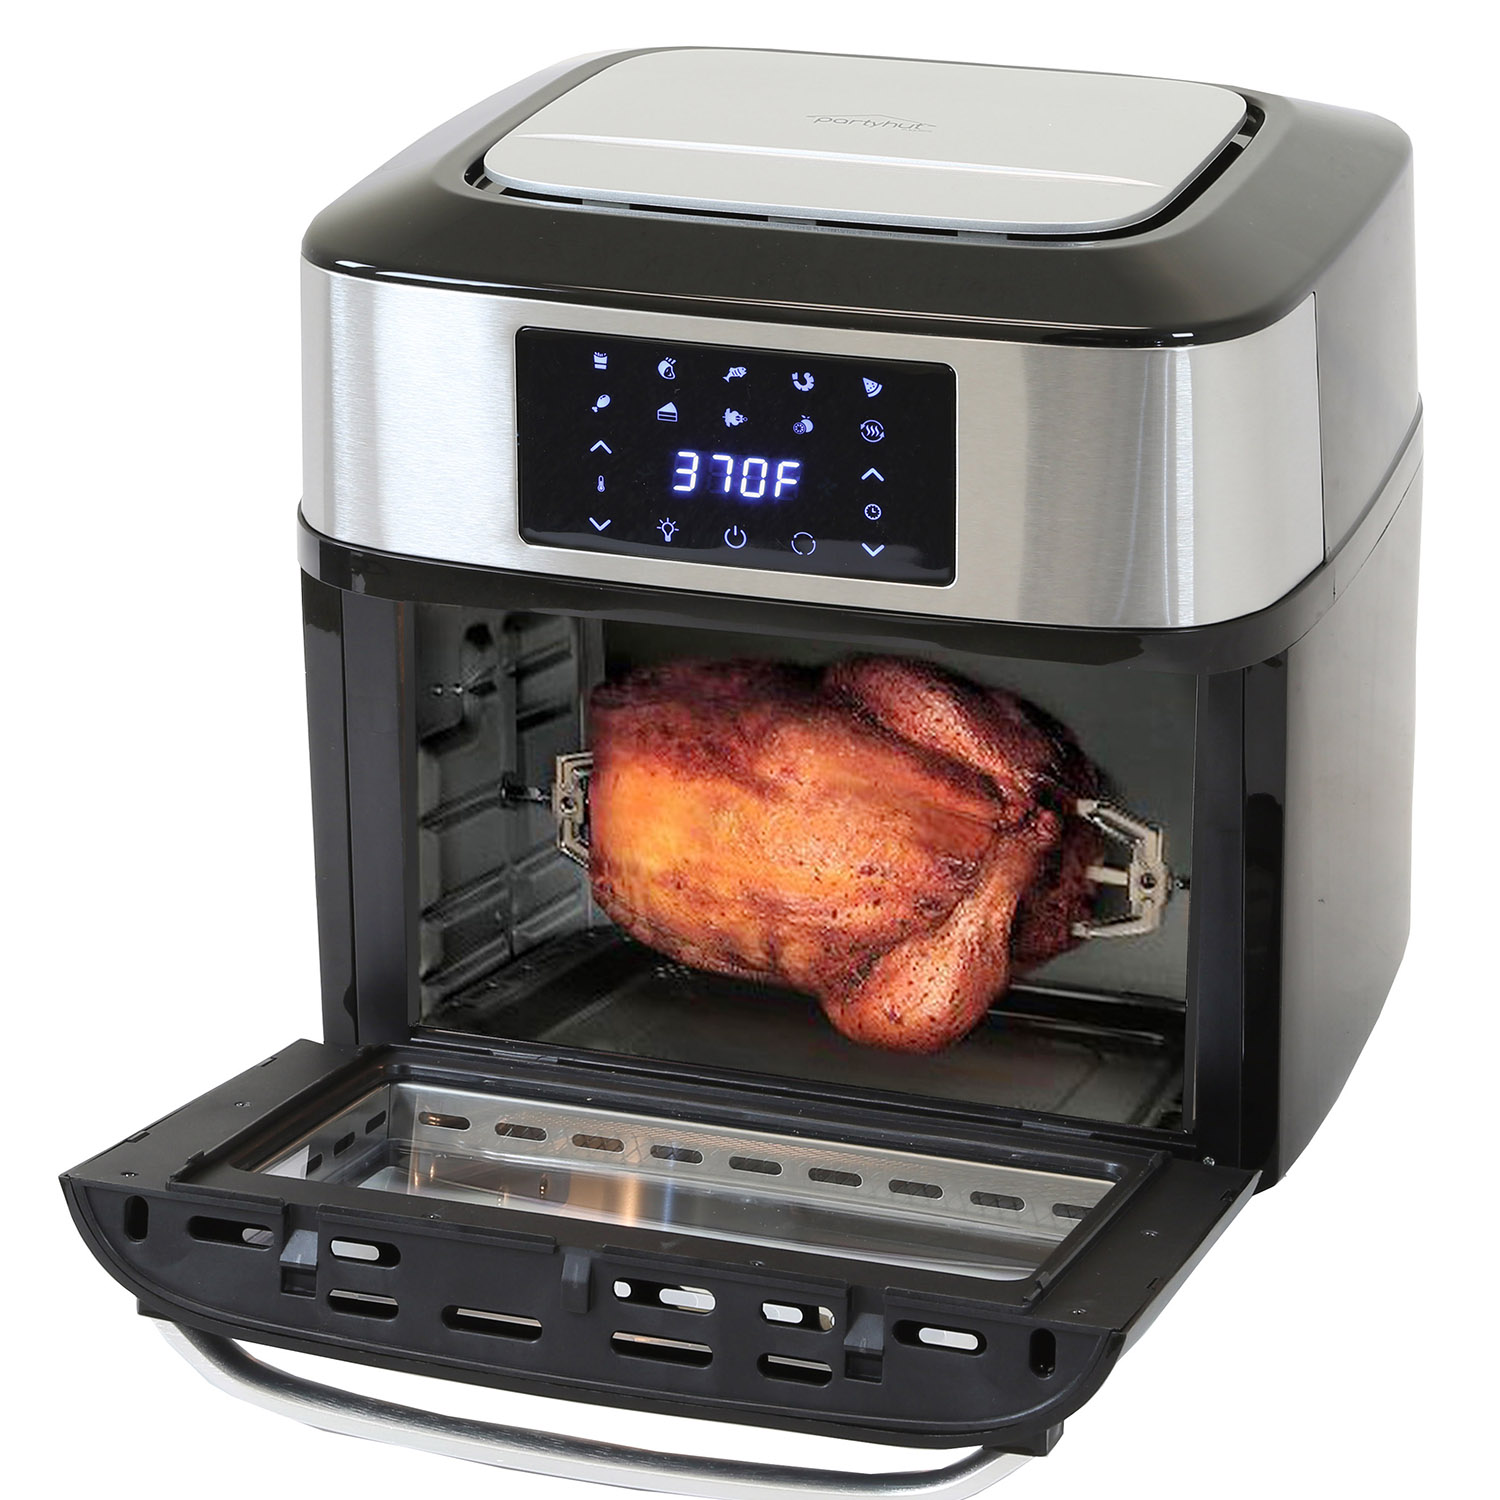 PartyHut 10-in-1 18L Convection Air Fryer Oven with Dehydrator & Rotisserie